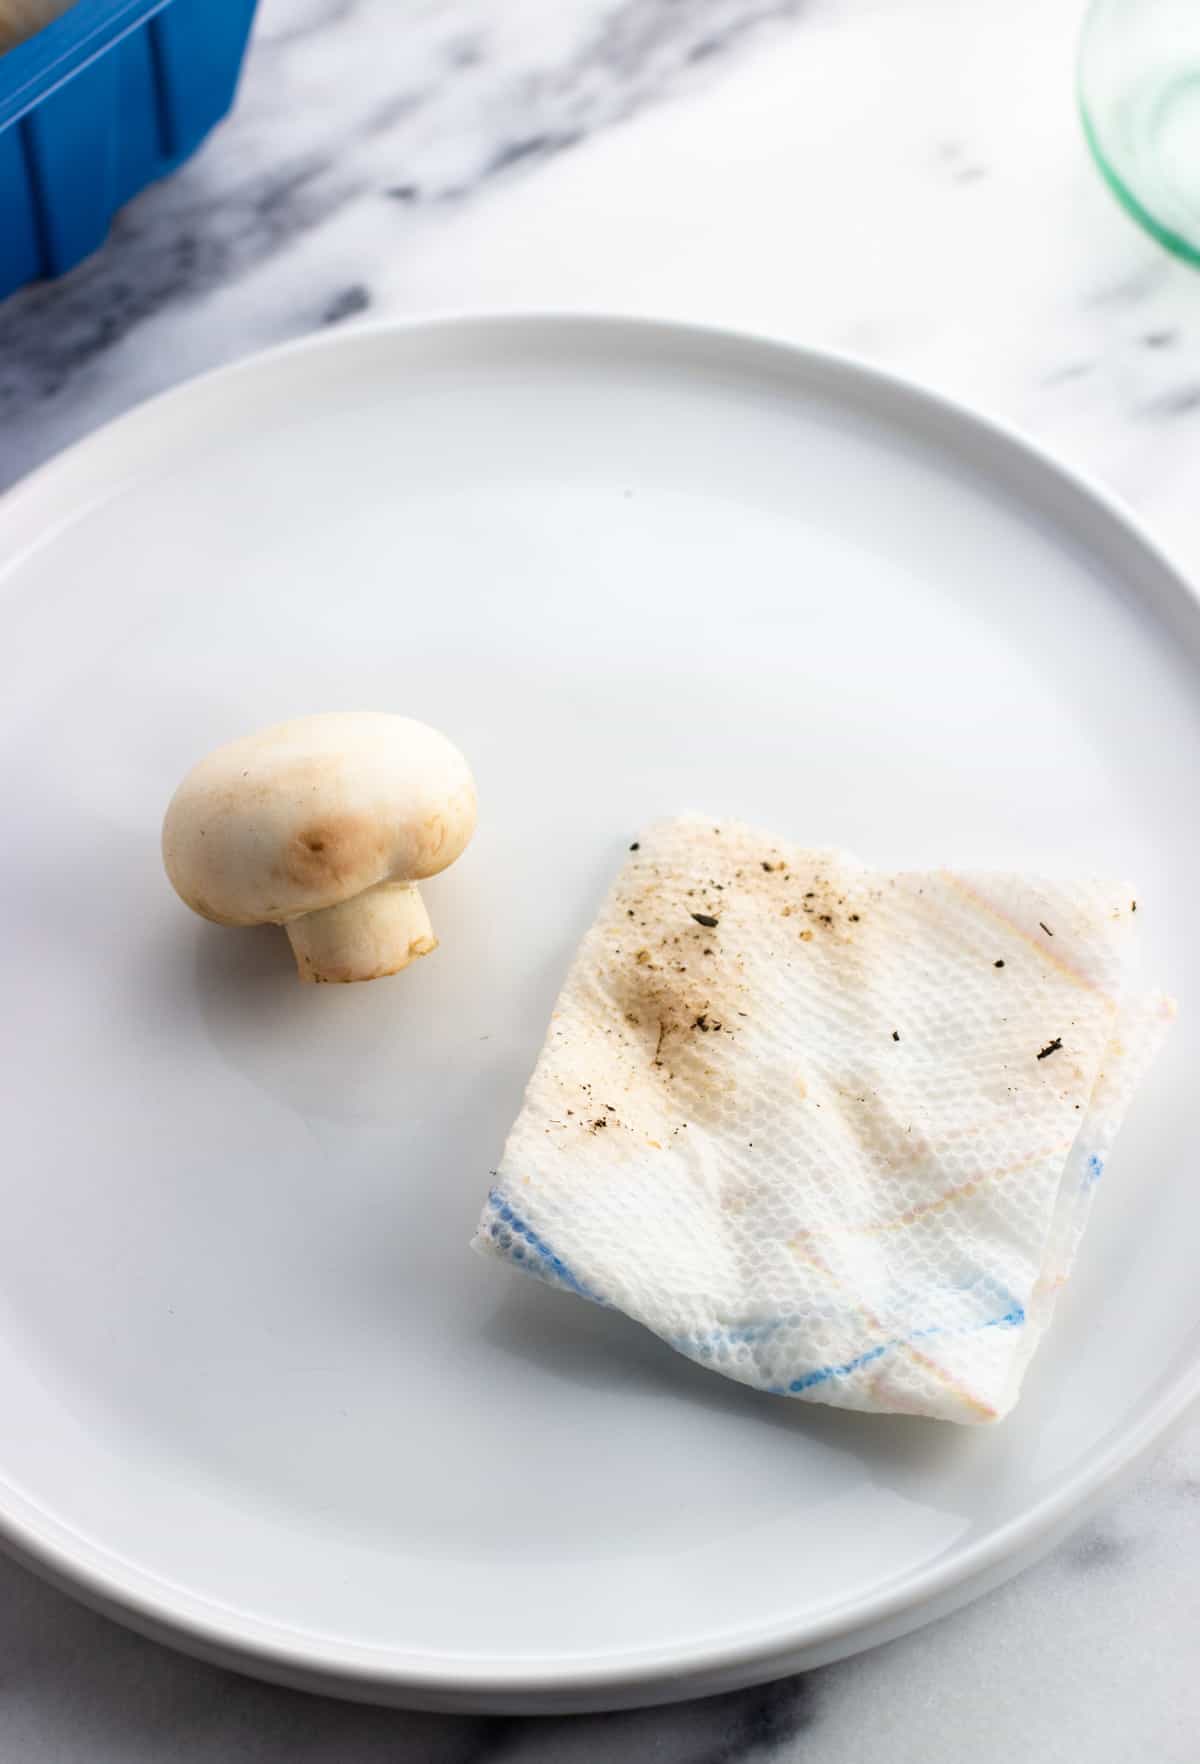 A button mushroom on a plate with a dirty paper towel next to it.